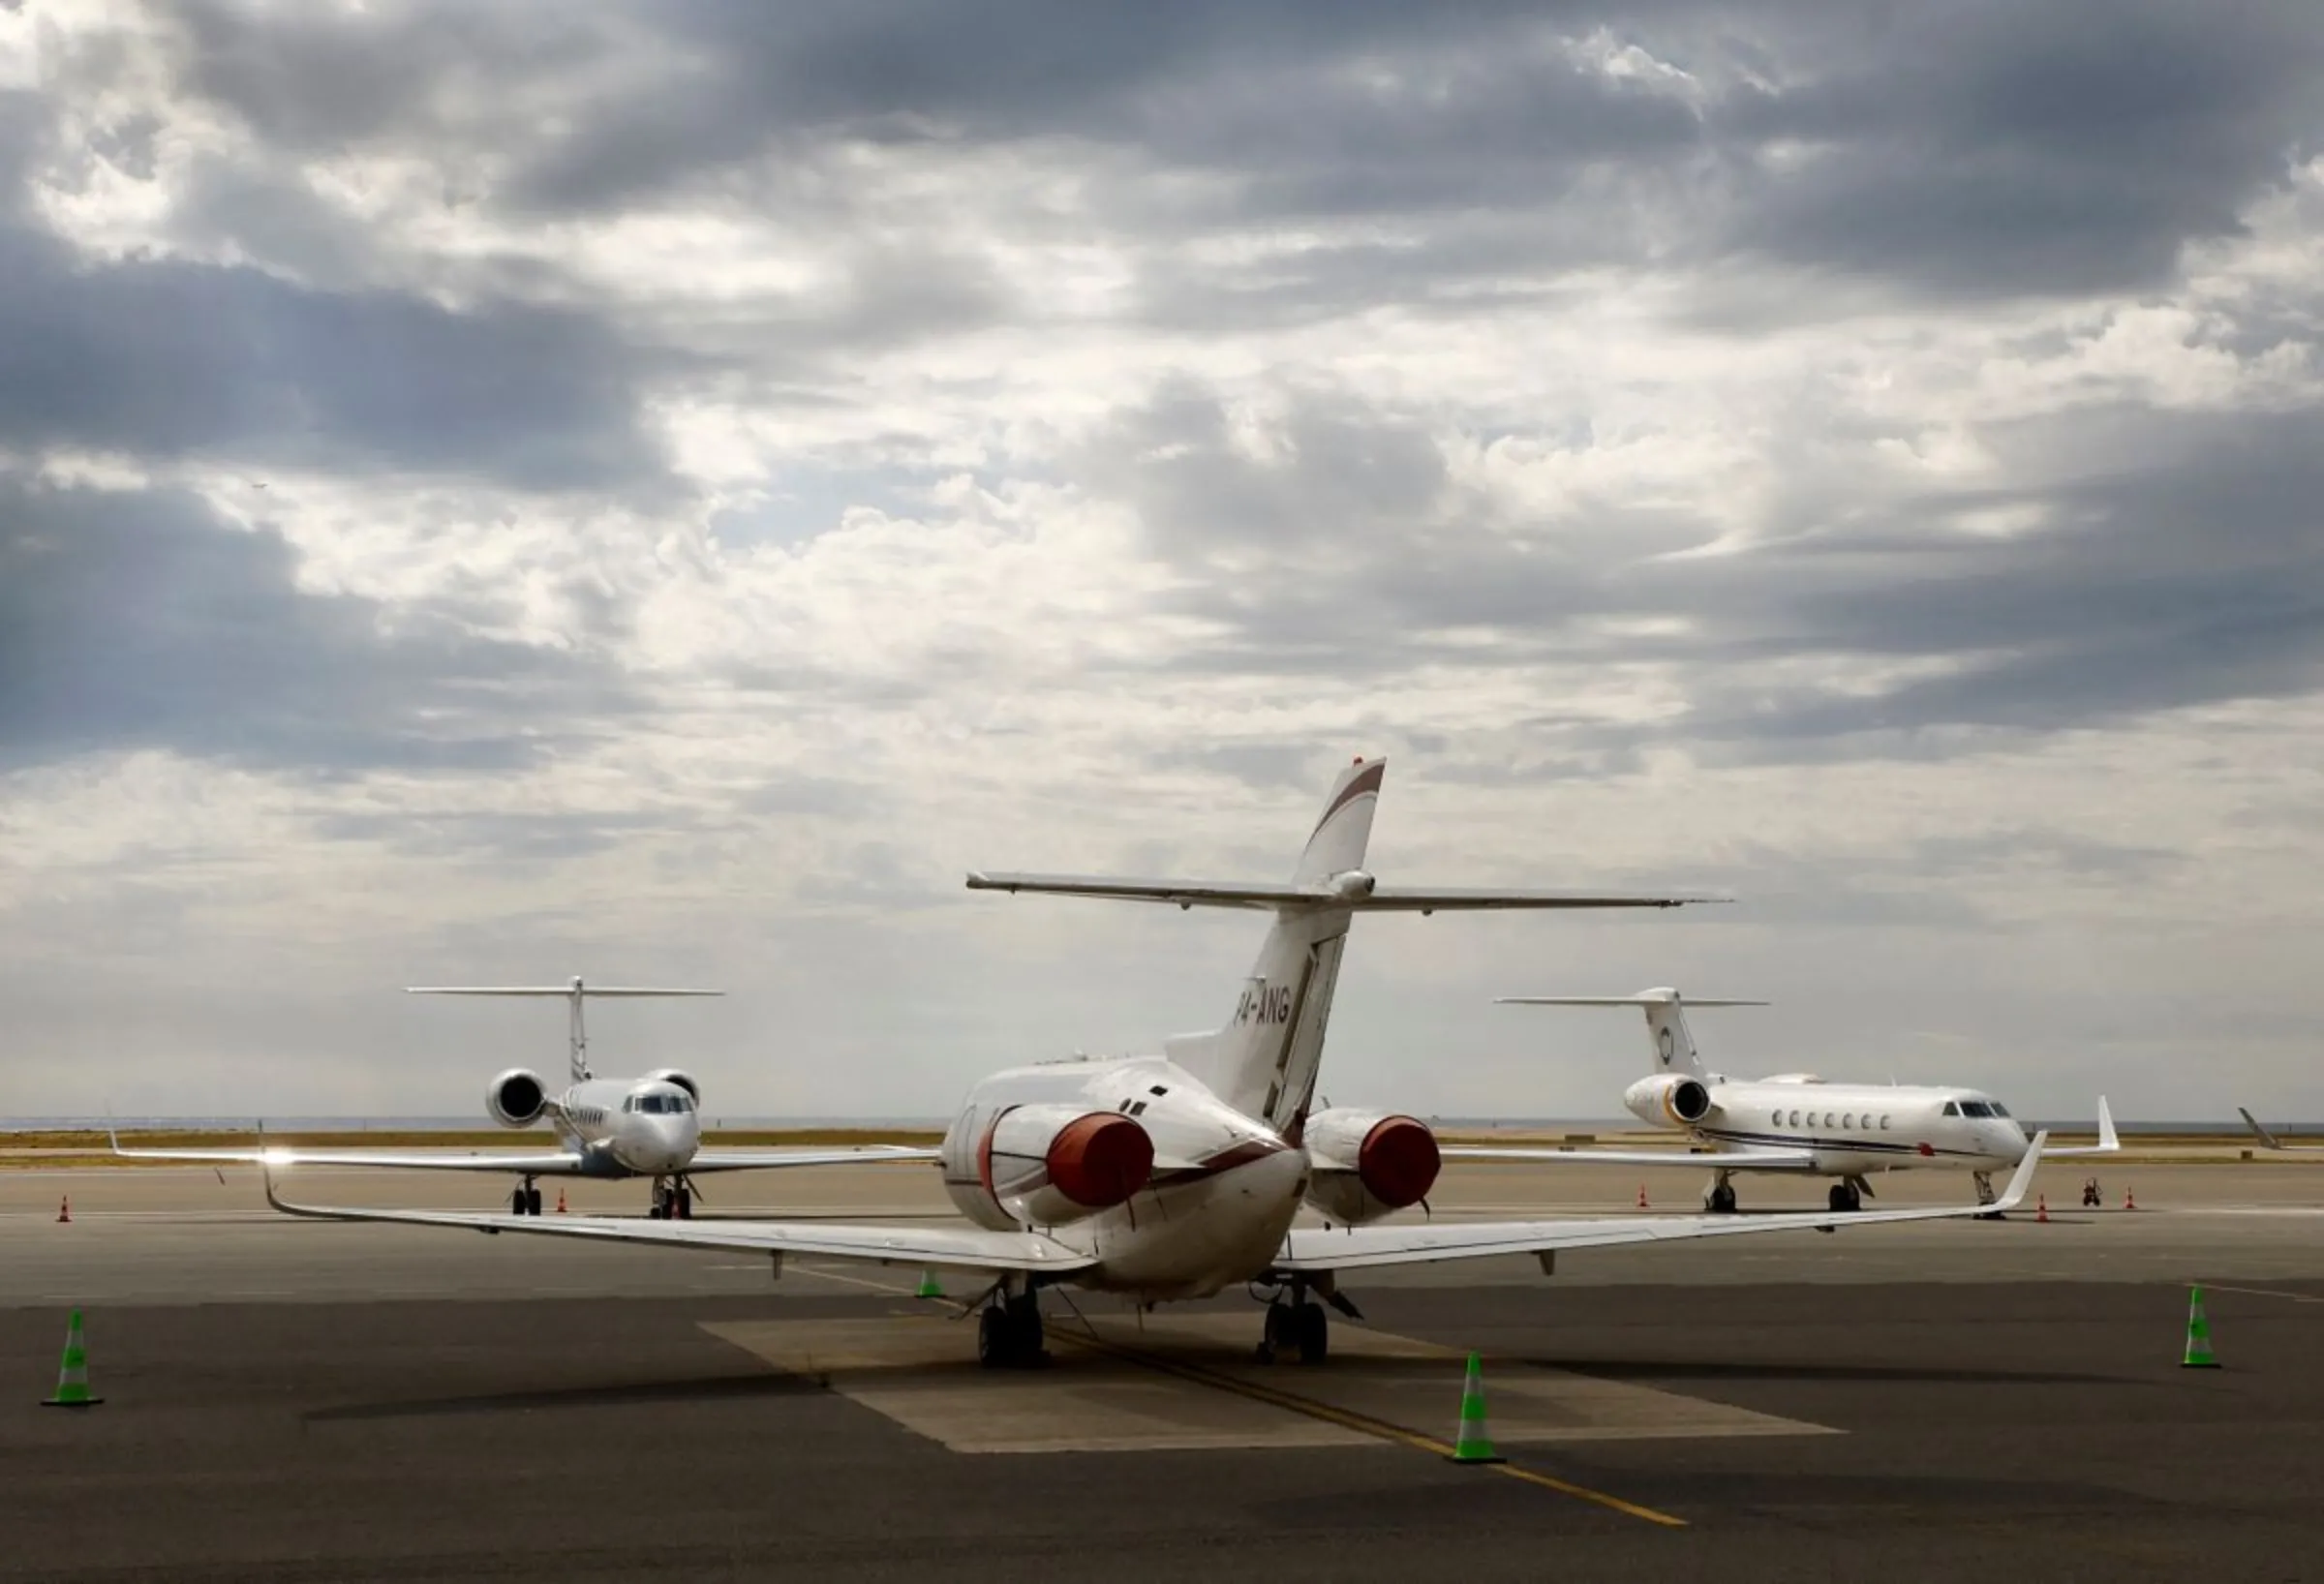 Private jets are seen on the tarmac of Nice international airport, France, September 6, 2022. REUTERS/Eric Gaillard